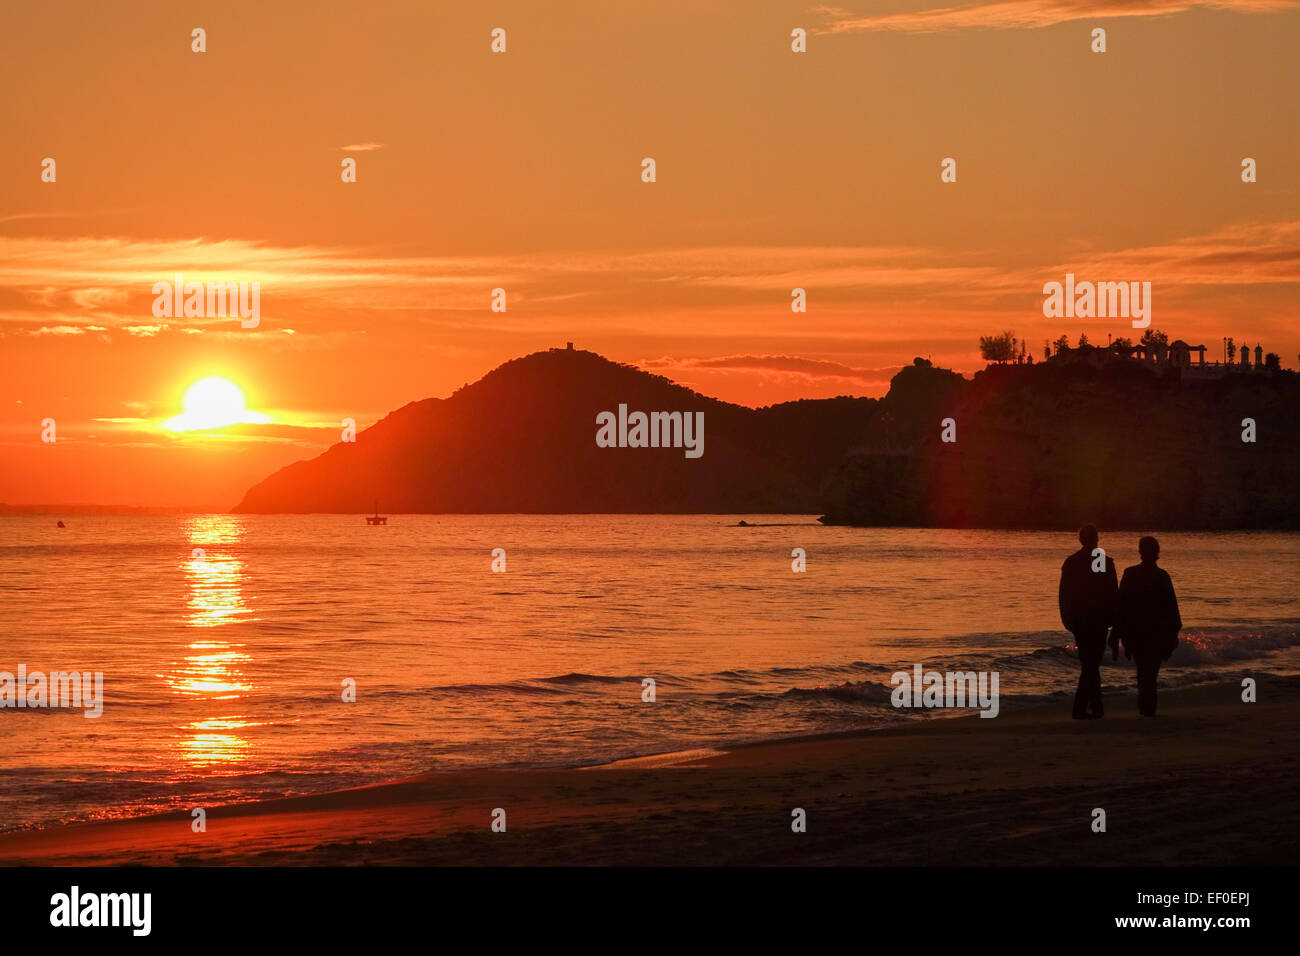 Benidorm sunset, orange with sea, sand, silhouettes and clouds Stock Photo